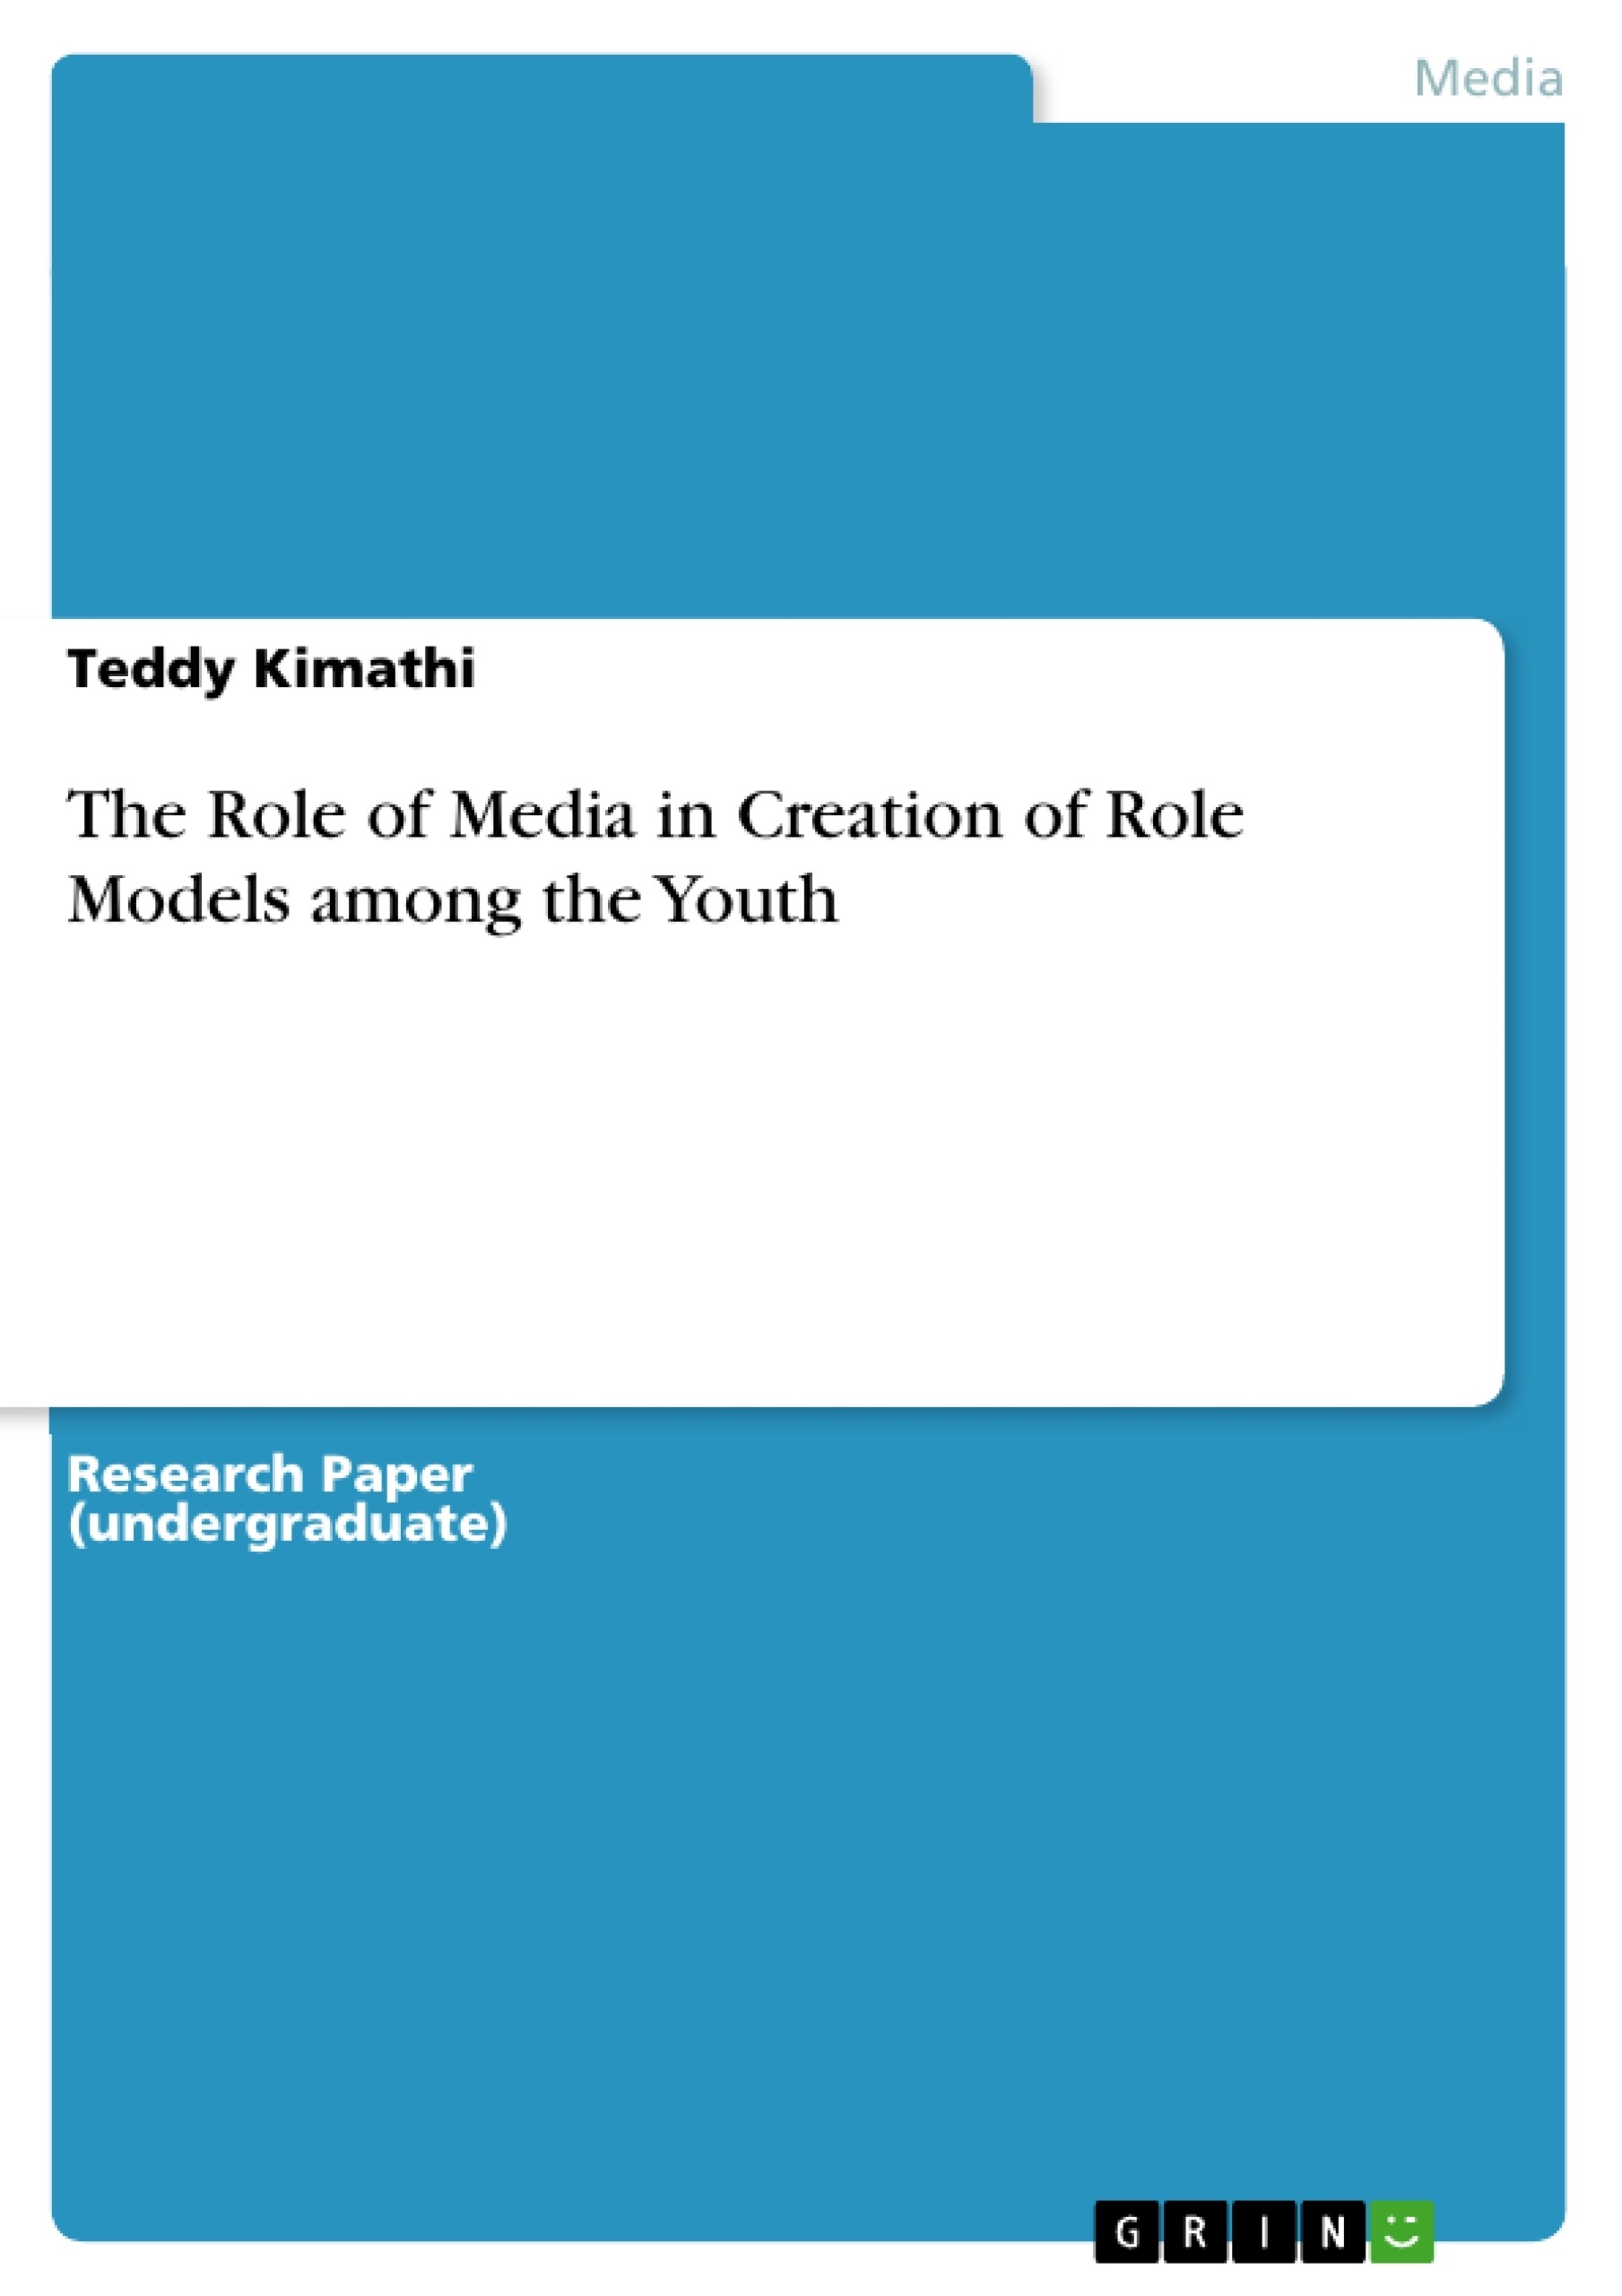 Titre: The Role of Media in Creation of Role Models among the Youth